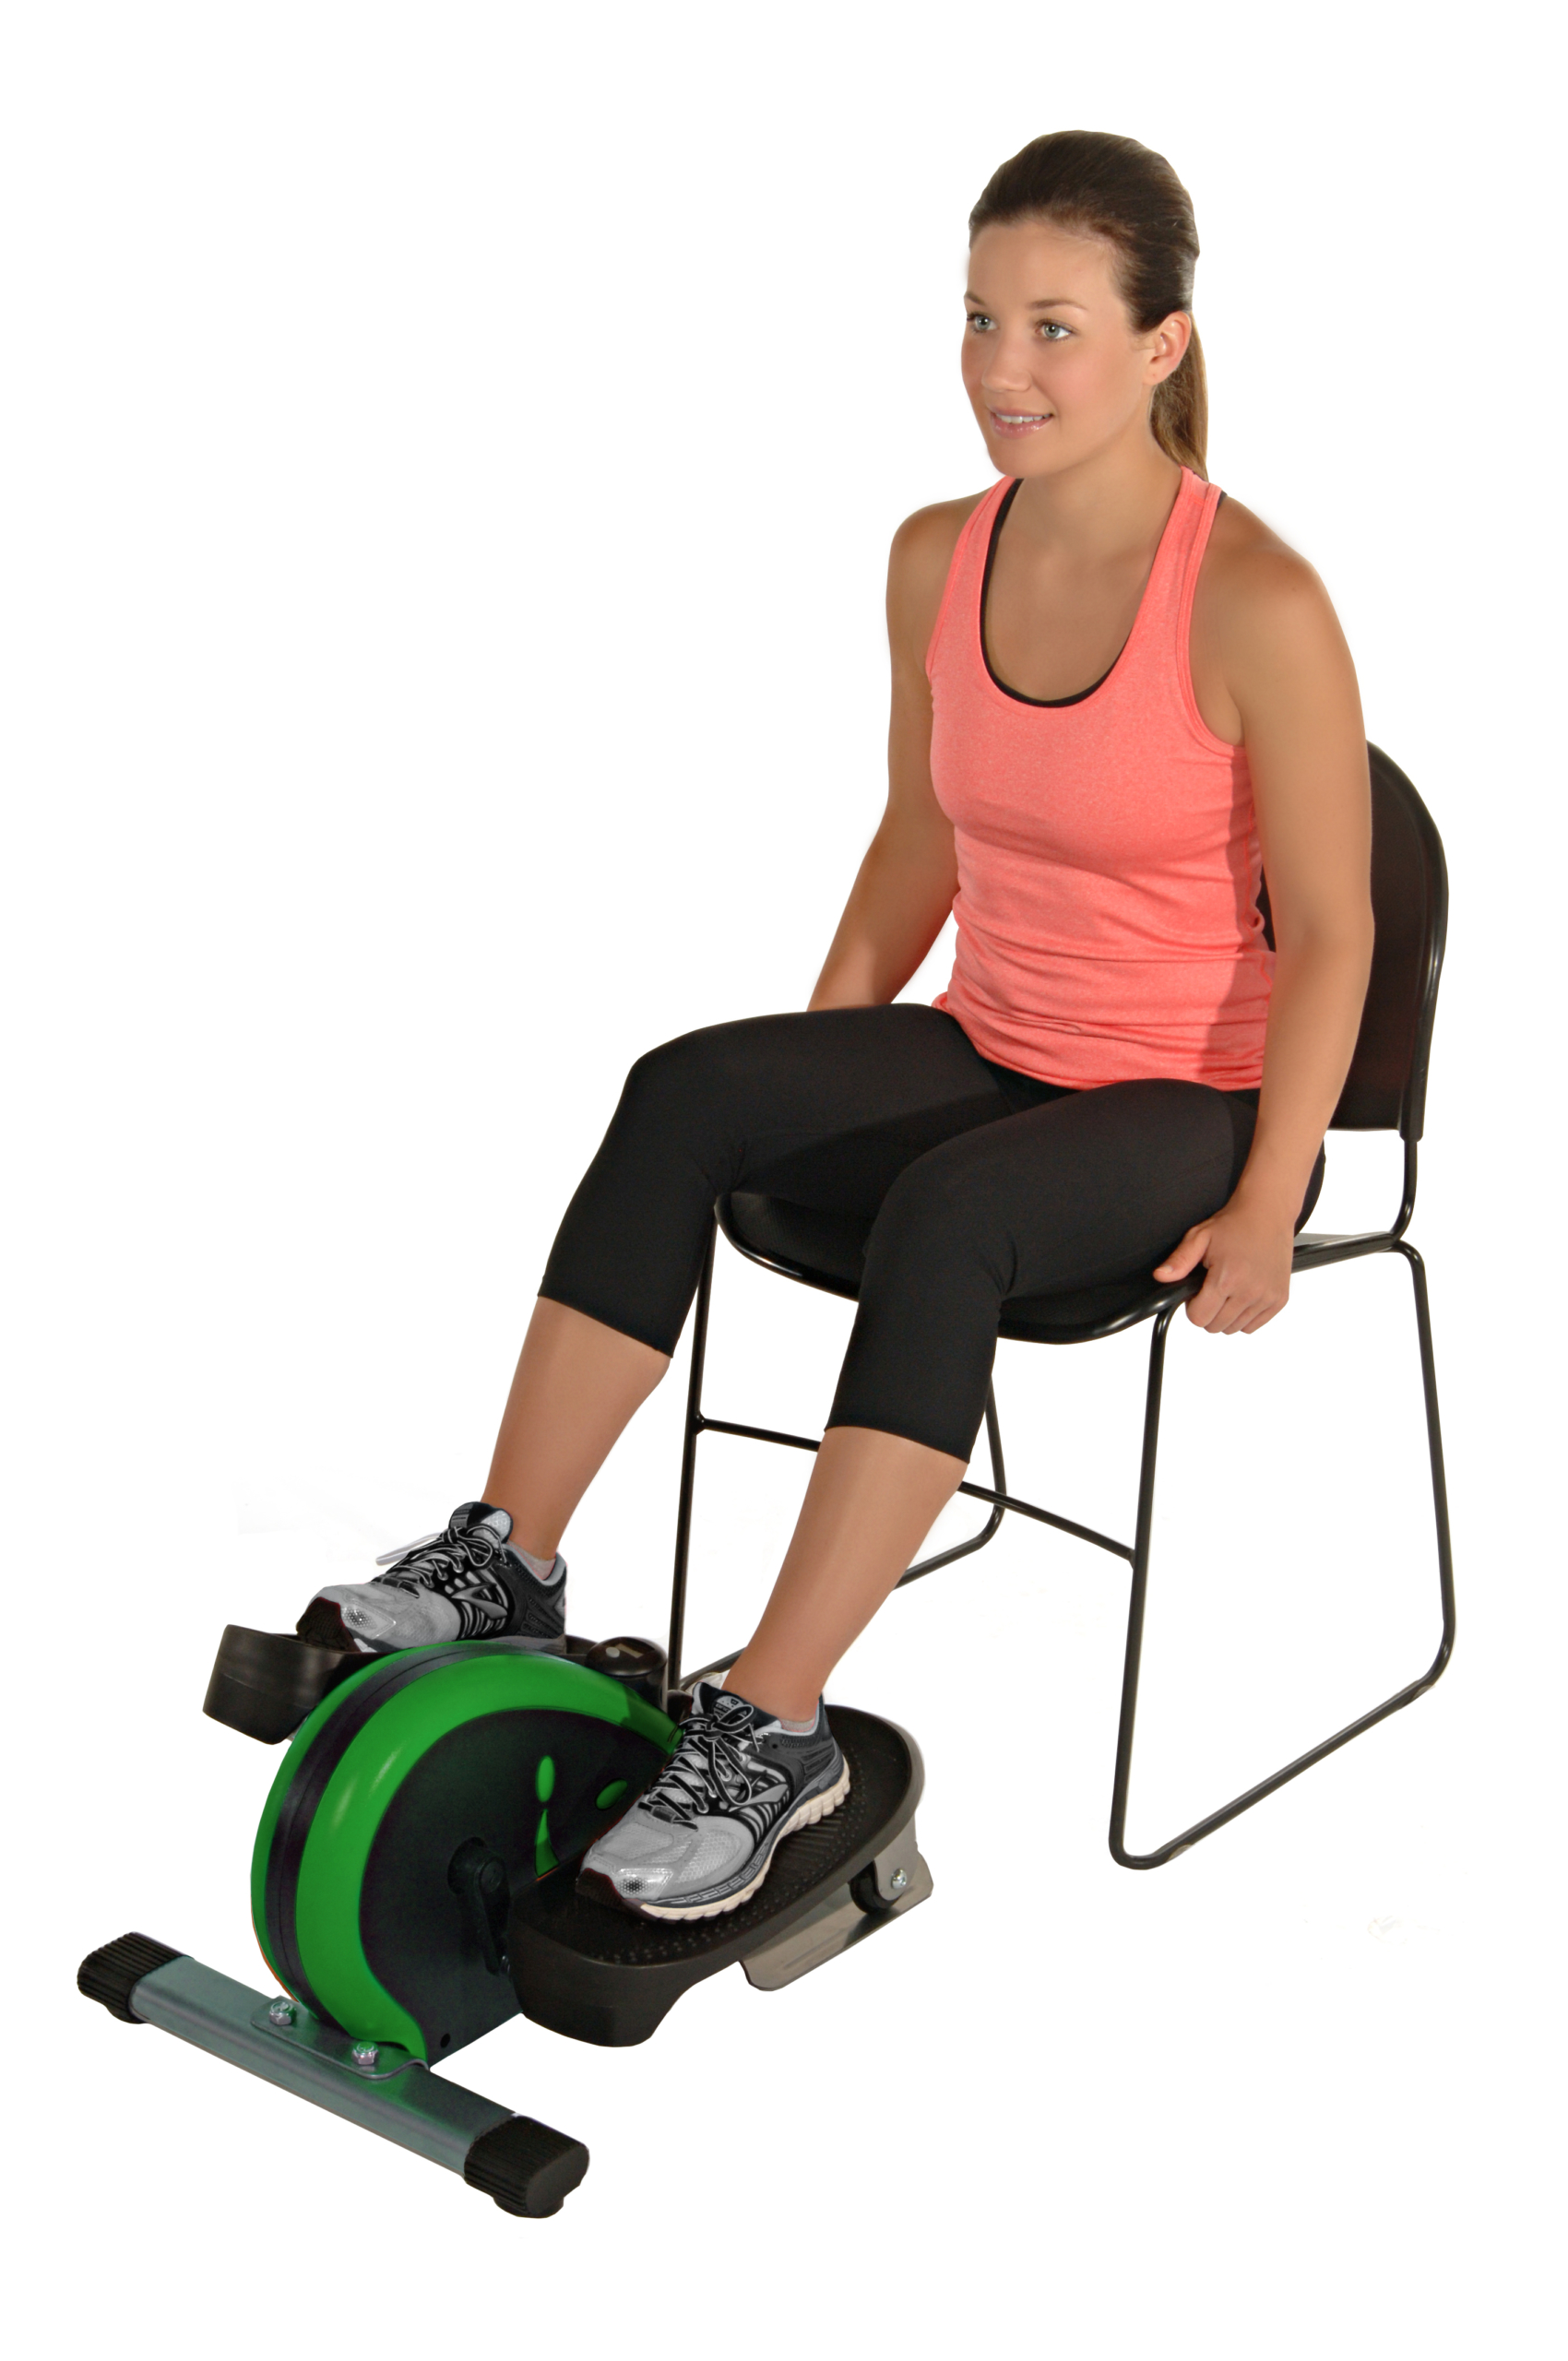 Stamina InMotion E-1000 Mini Elliptical Trainer, Adjustable Tension Resistance, 250 lb. Weight Limit, Green - image 4 of 5